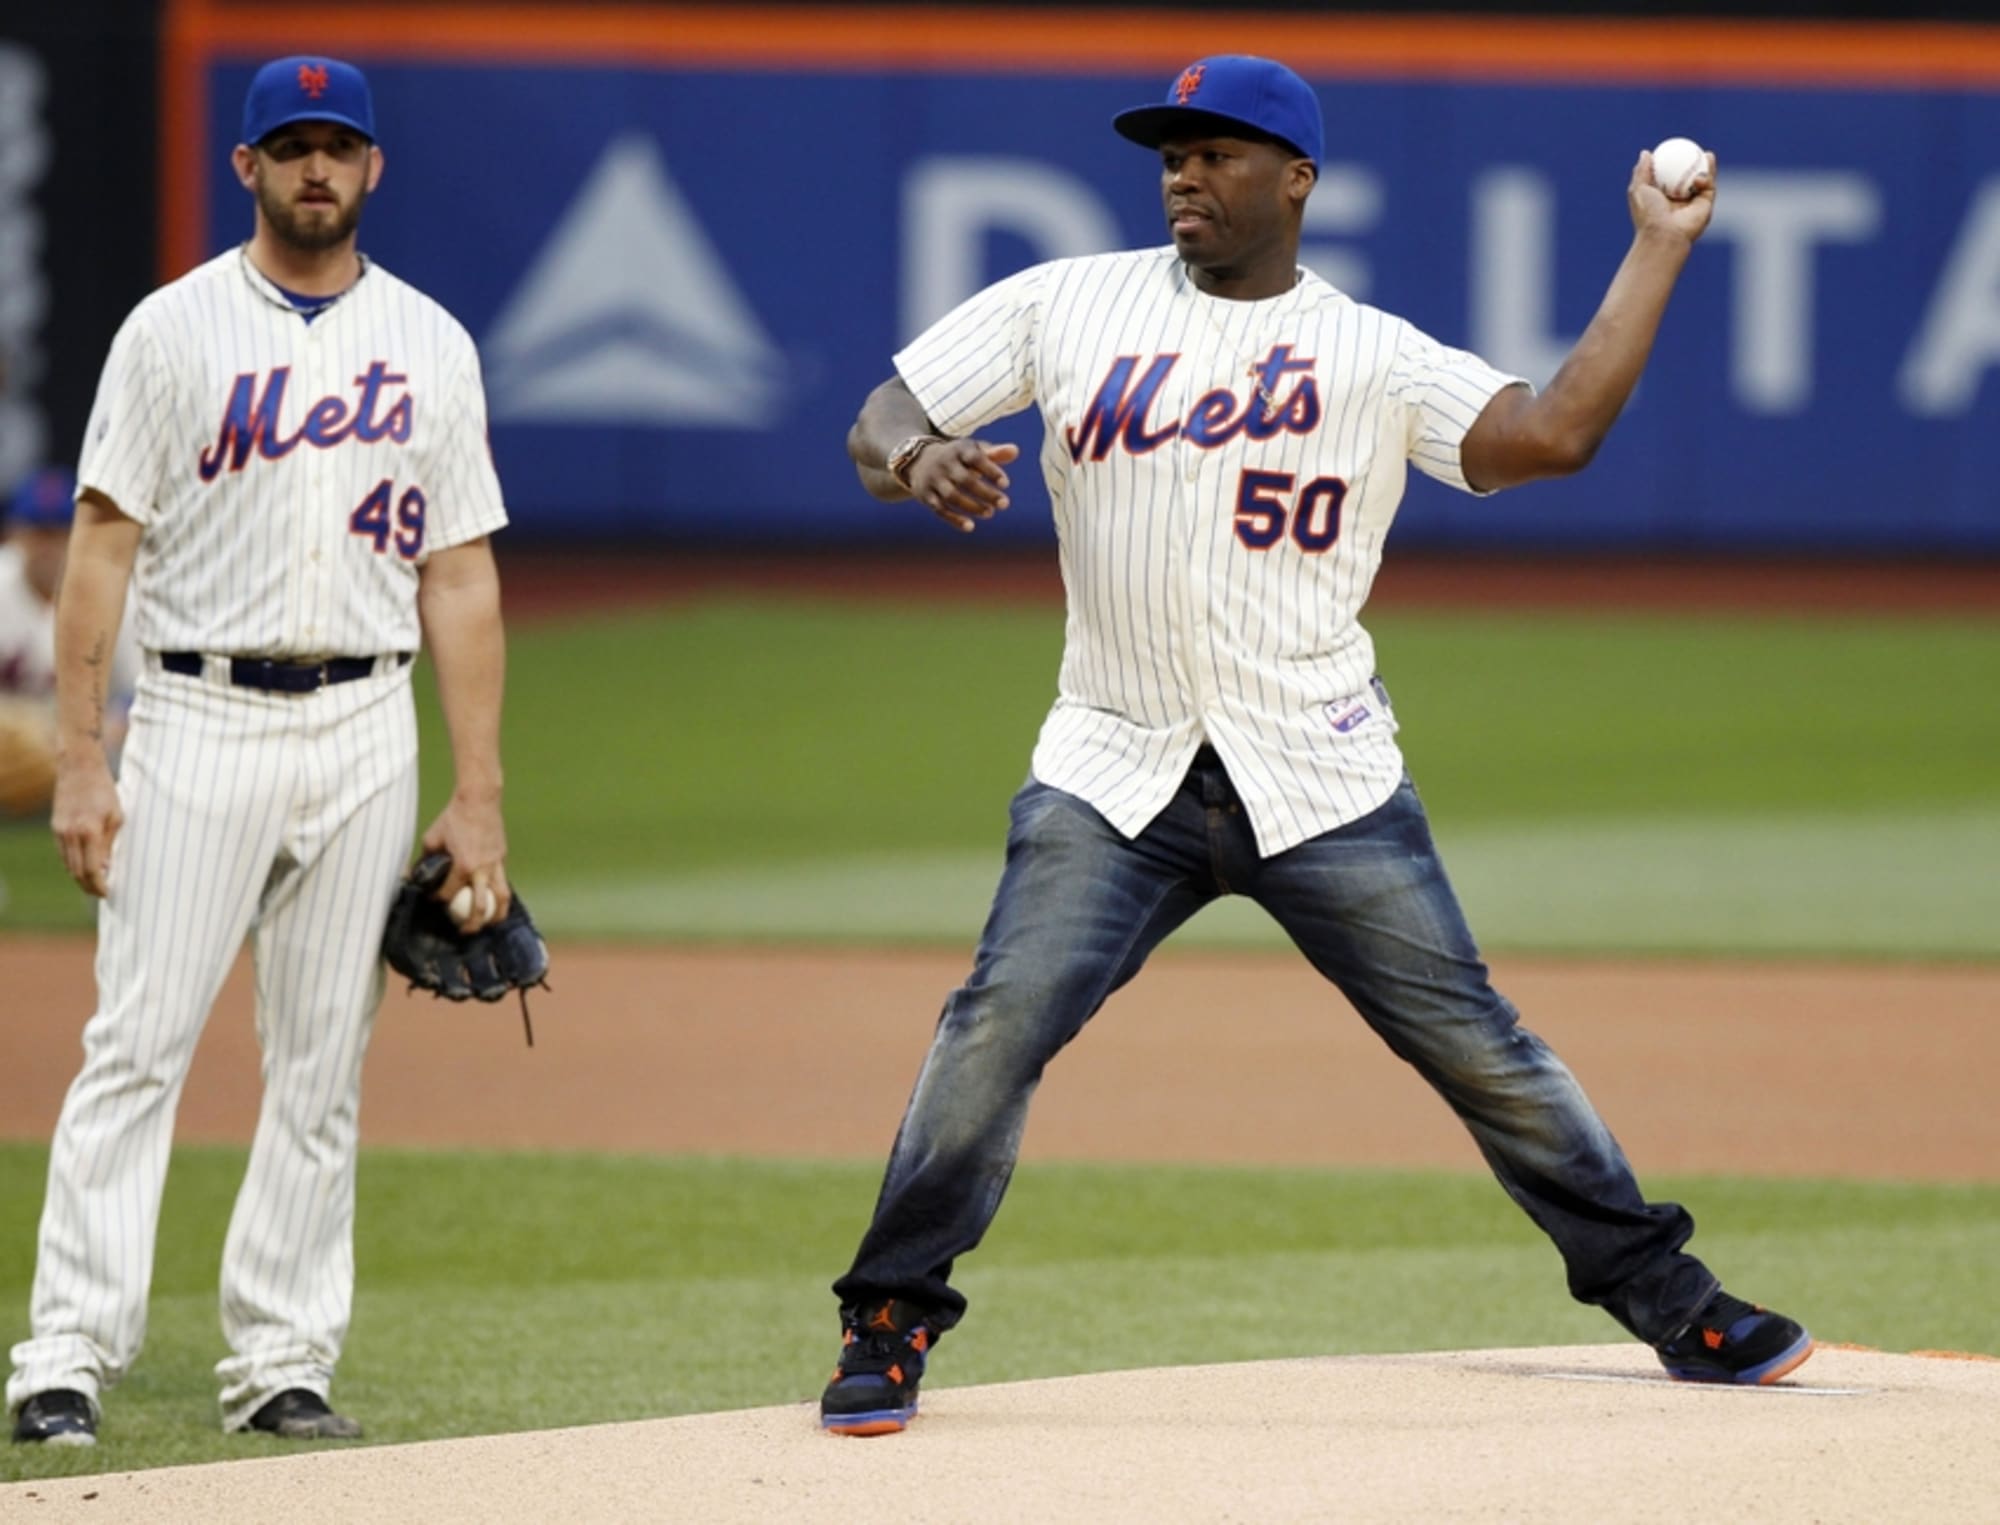 Vladimir Guerrero hits 50 Cent's awful first pitch (Video)